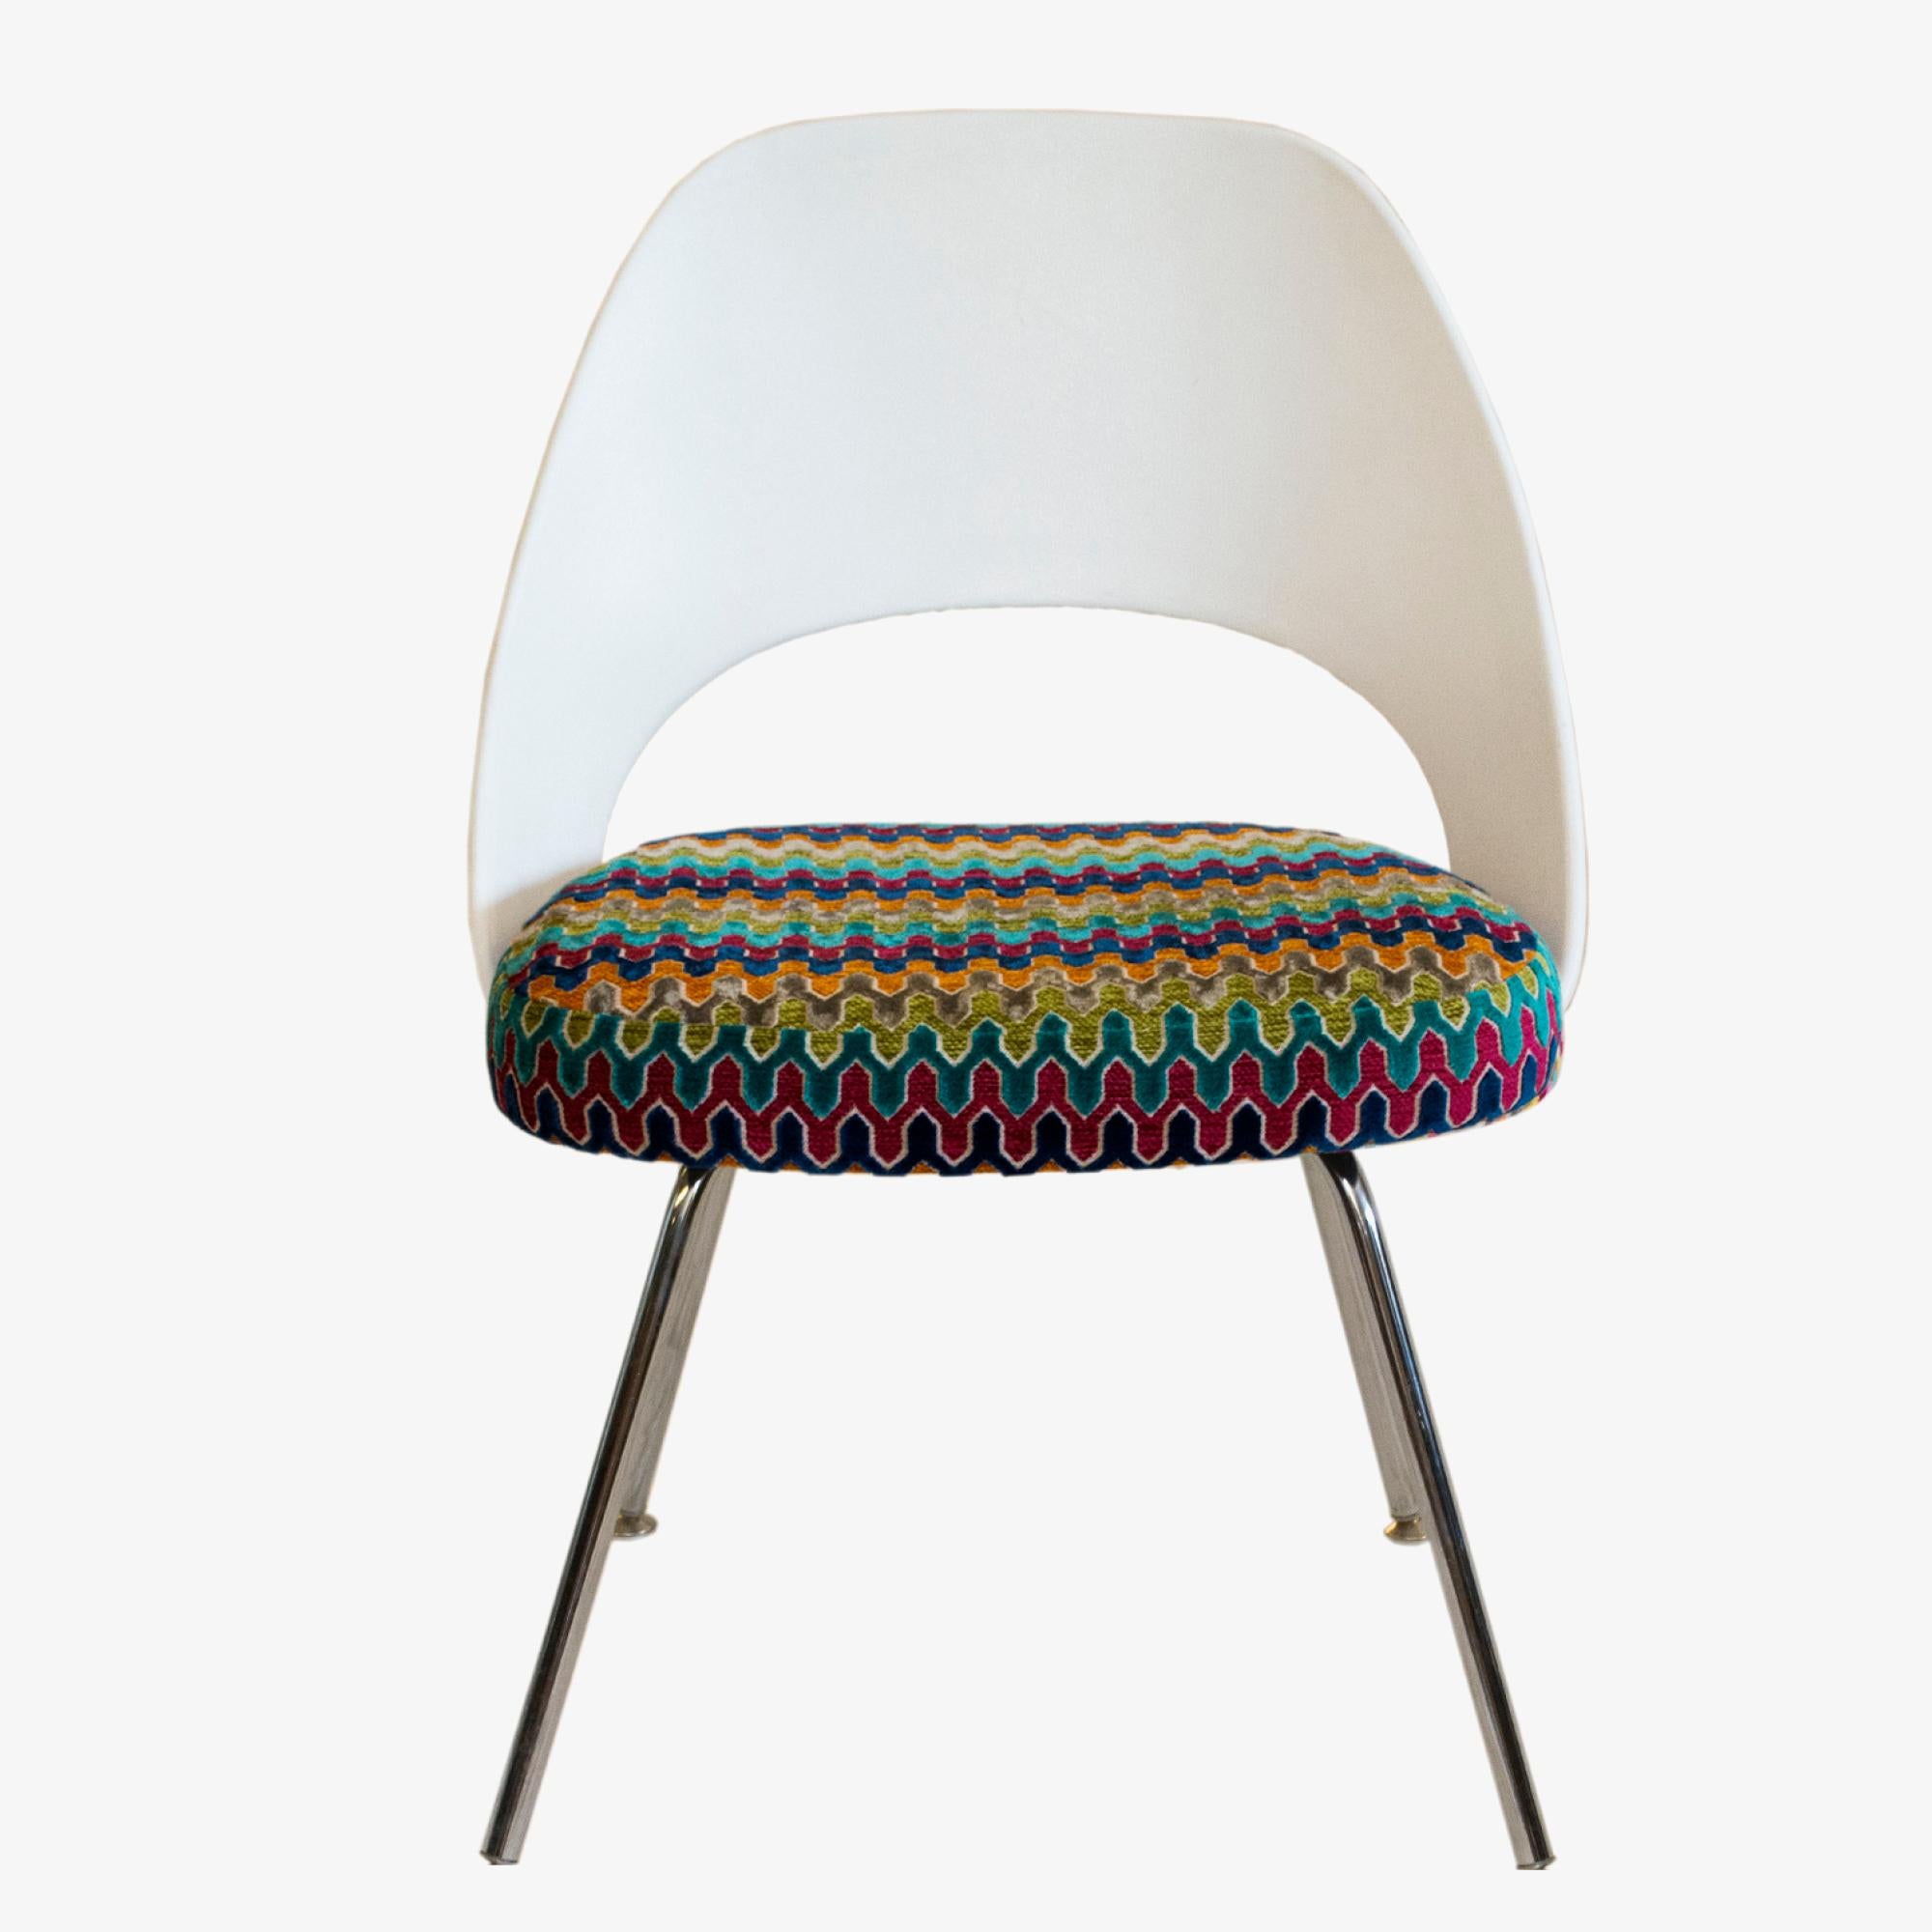 This Eero Saarinen for Knoll plastic-back side chair was reupholstered in a geometric zigzag mutlicolor fabric. We offer this at a set - perfect for a fun kitchen - or as a single chair, great for a child’s room or fun desk chair. You can also